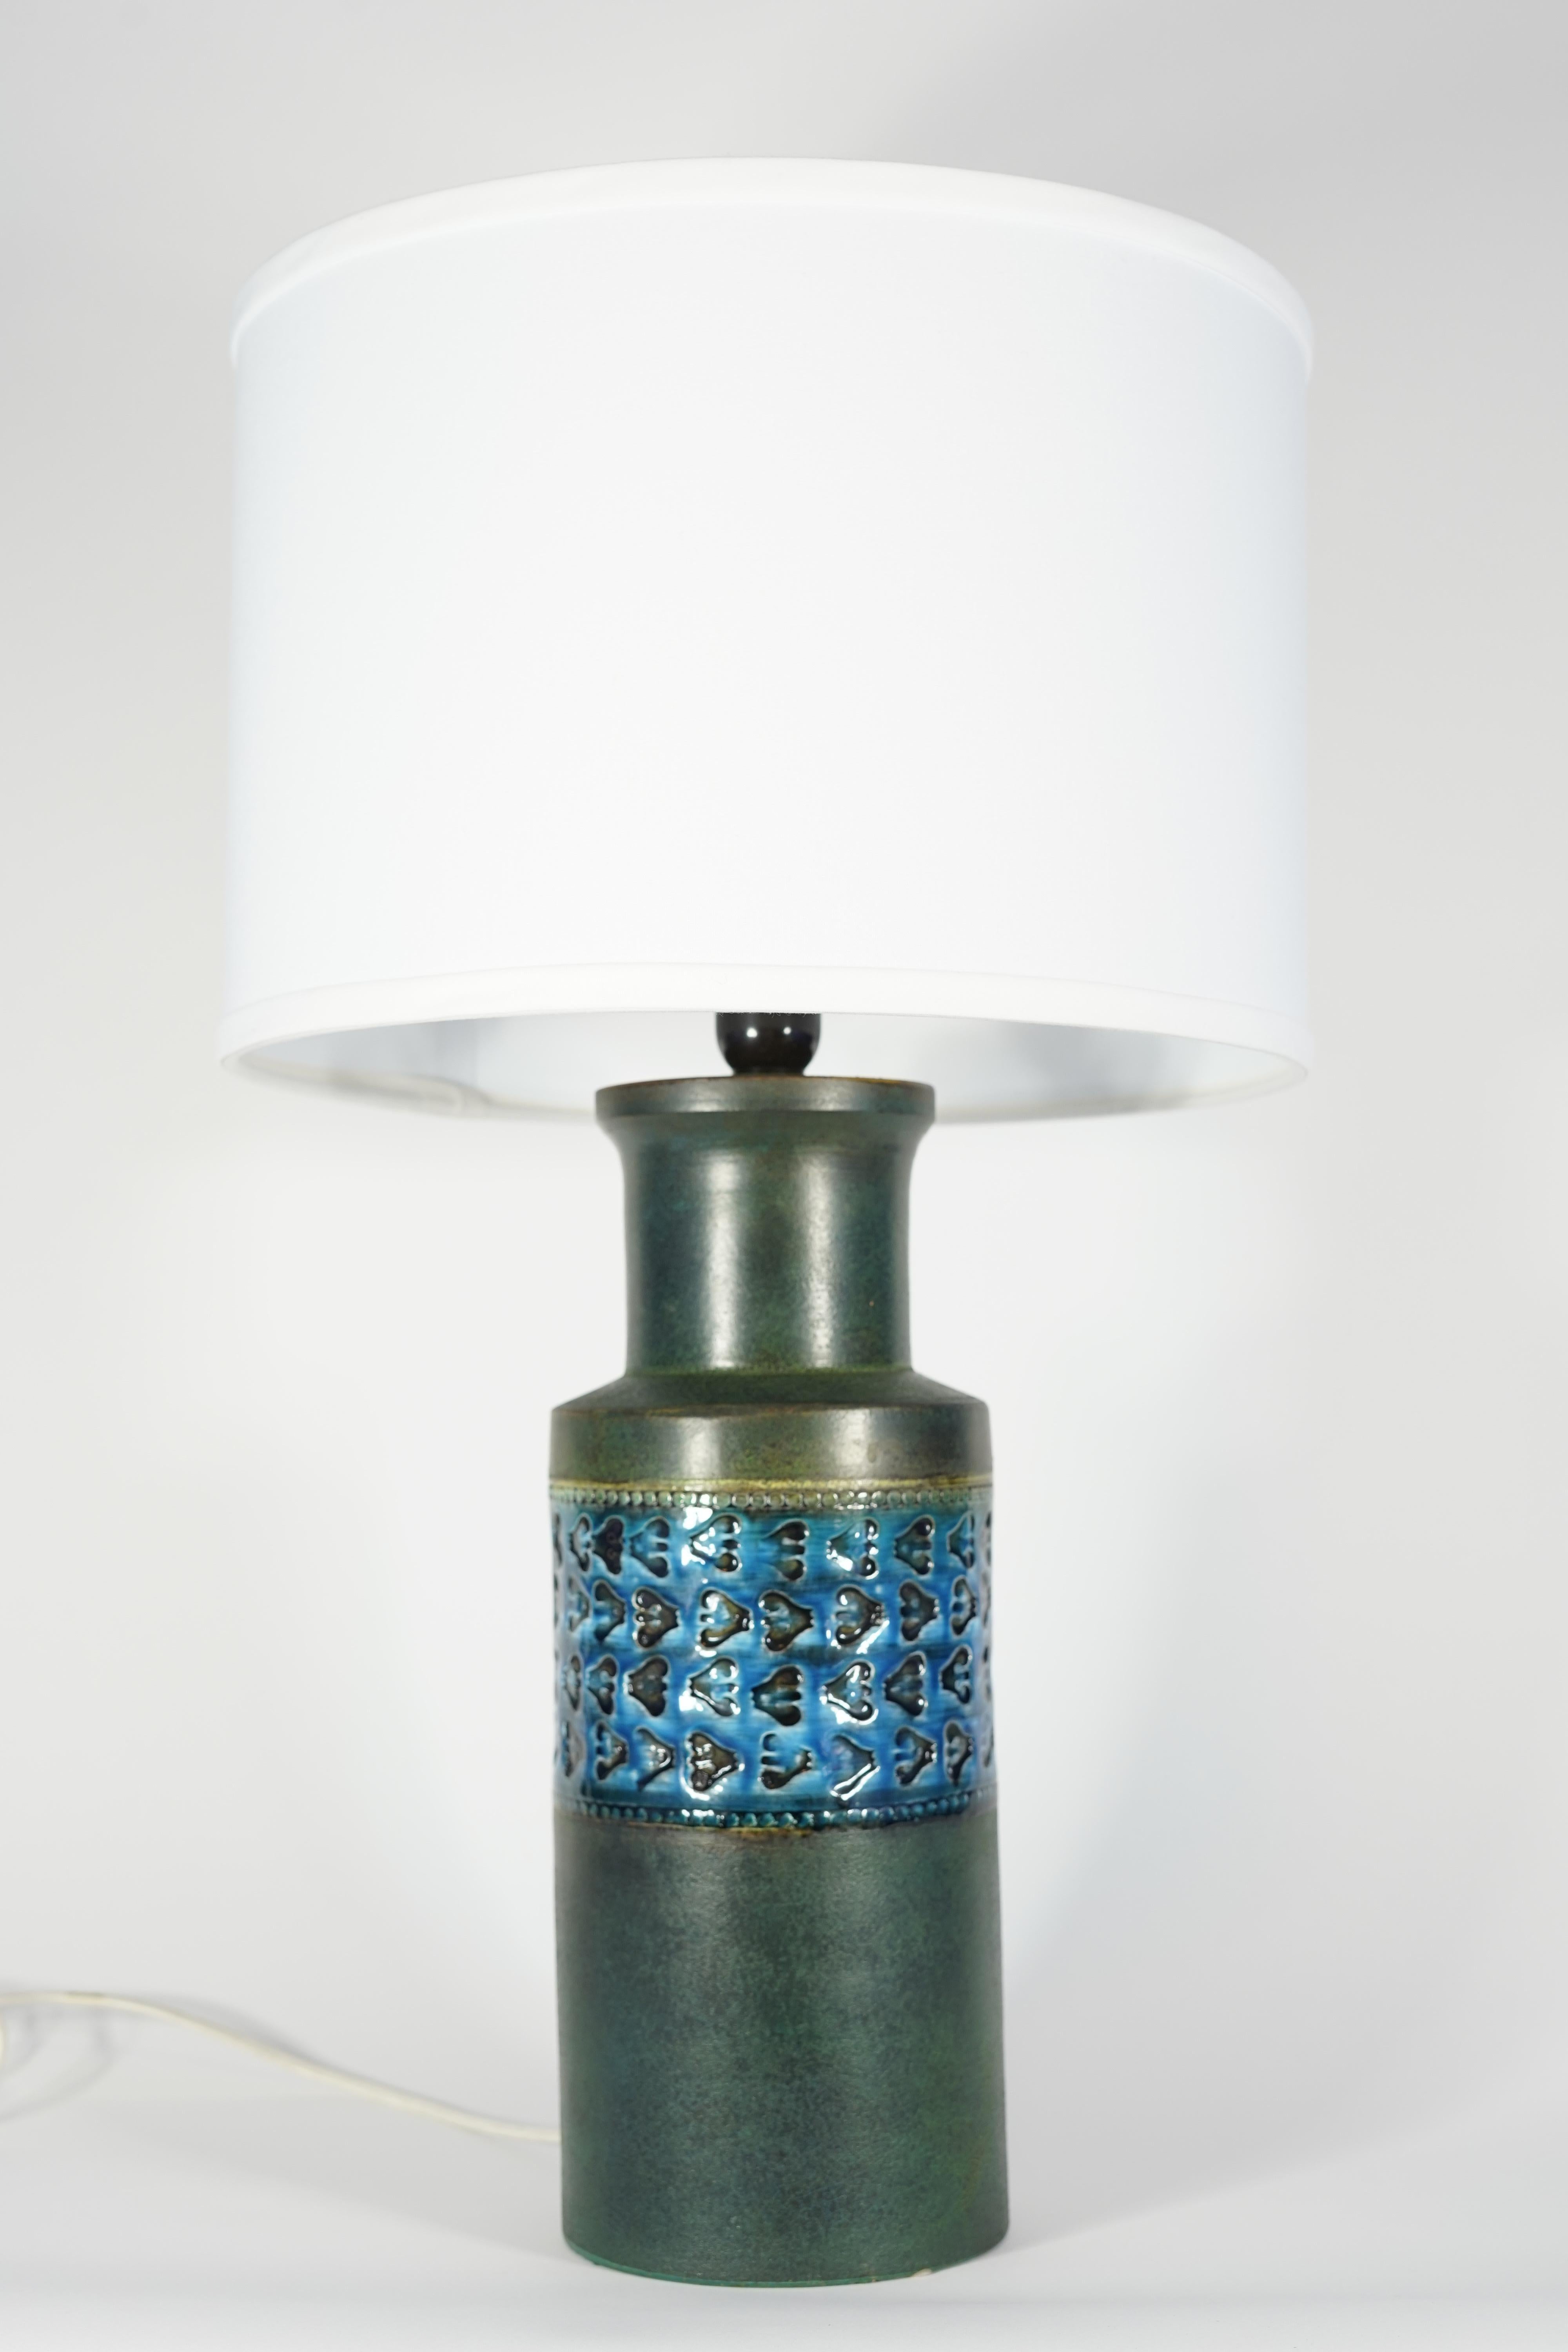 Bitossi/Bergboms Lamp Green and Blue Glaze, Italy, 1970 For Sale 2